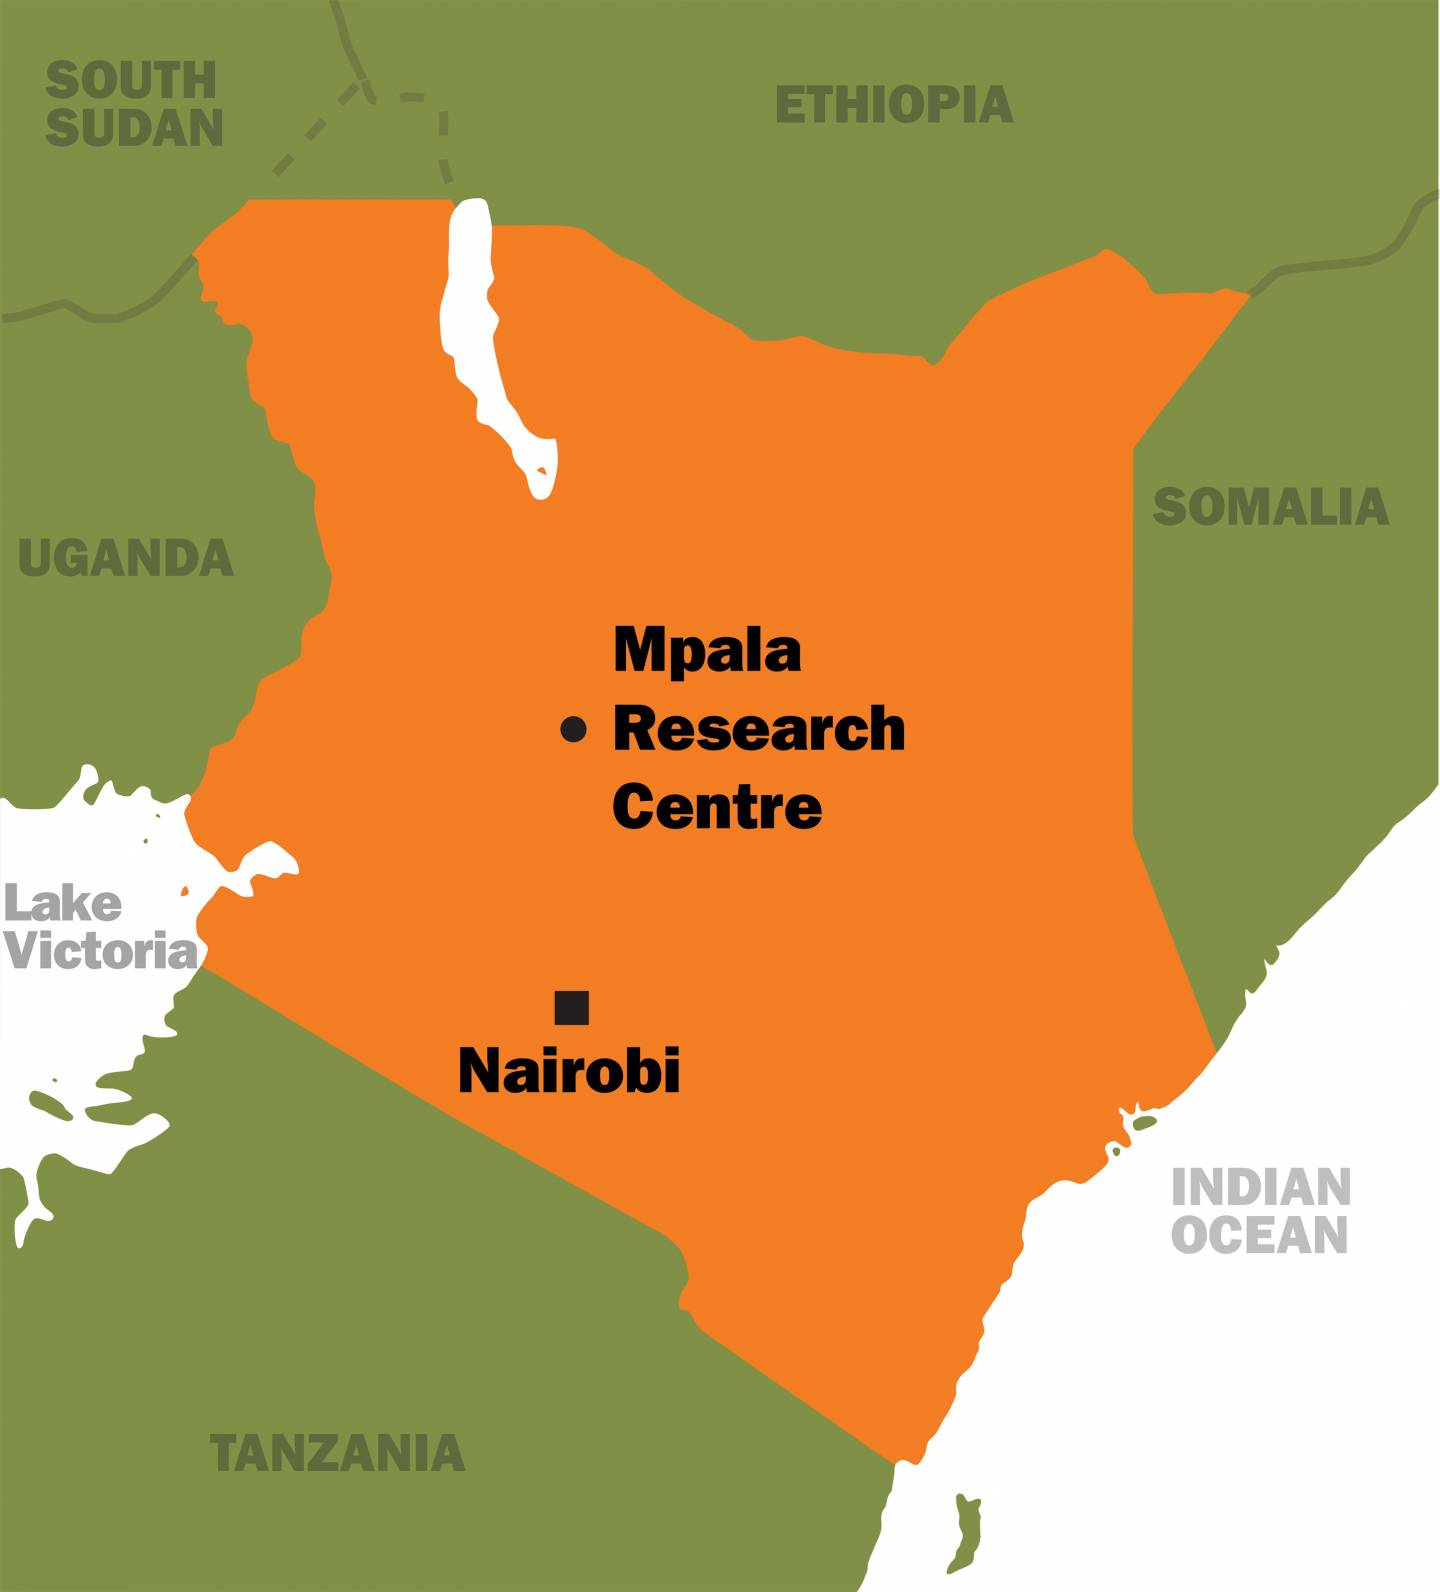 Map of Kenya, showing where the Mpala Research Center is located